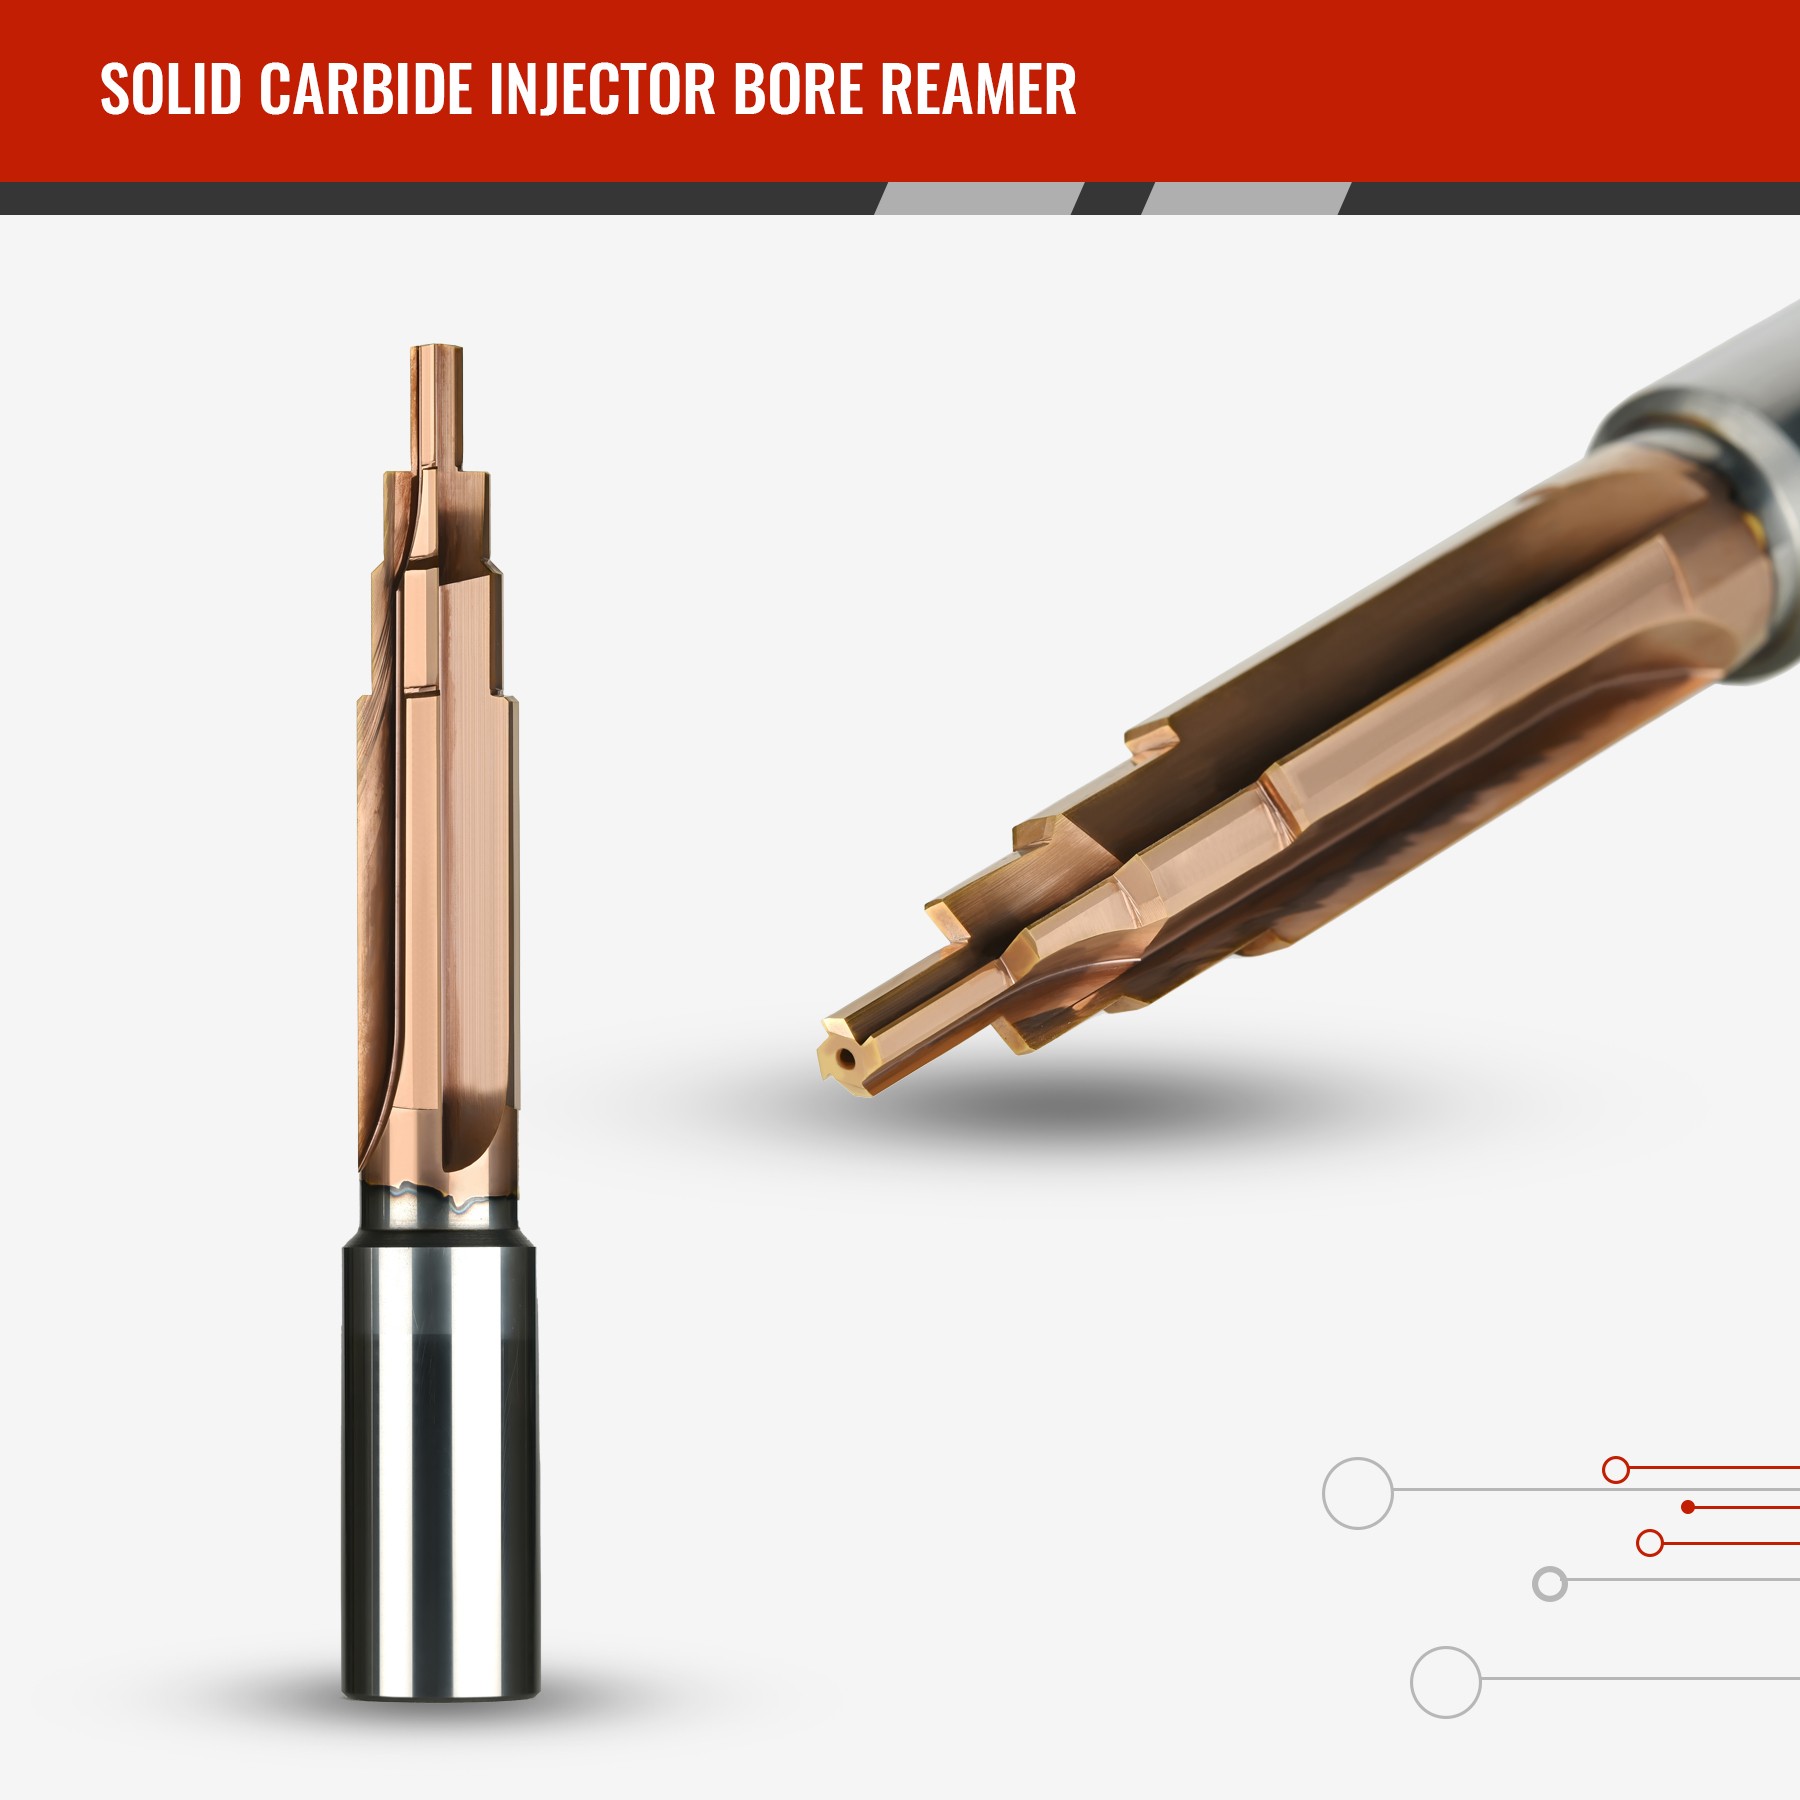 Solid Carbide Injector Bore Reamer